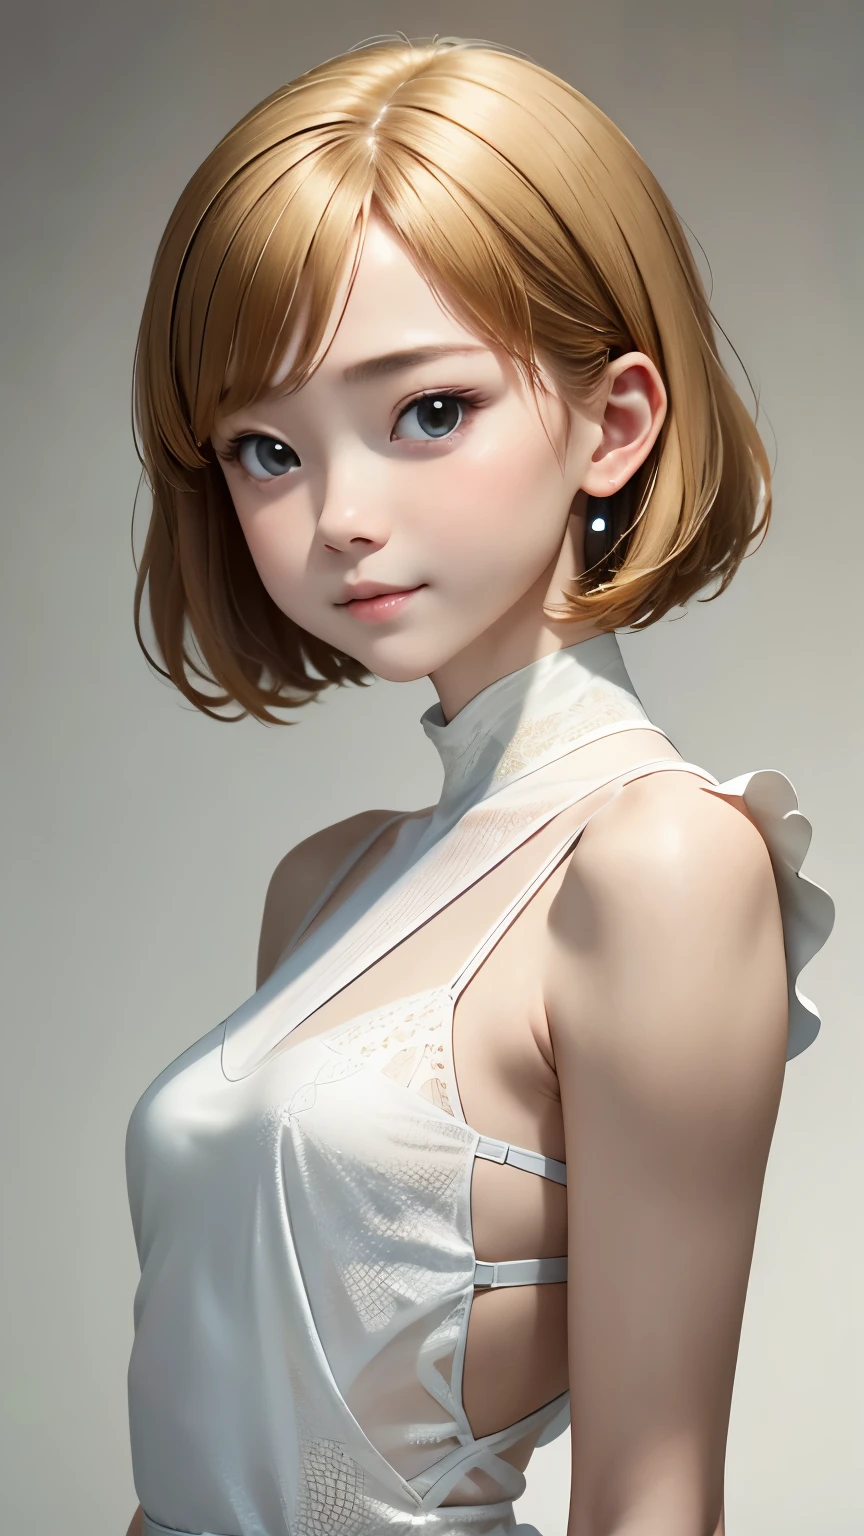 anatomy、realistic depiction of the human body、one woman、１６talent、very cute face、baby face、beige hair、unique short bob、small breasts、transparent skin、Immersive depiction、Also々new expression、realism、upper body angle、focus on the face、white elegant dress、blurred background、highest quality、ultra high resolution、best image quality、masterpiece、digital art、digital portrait、perfect lighting、professional photographer